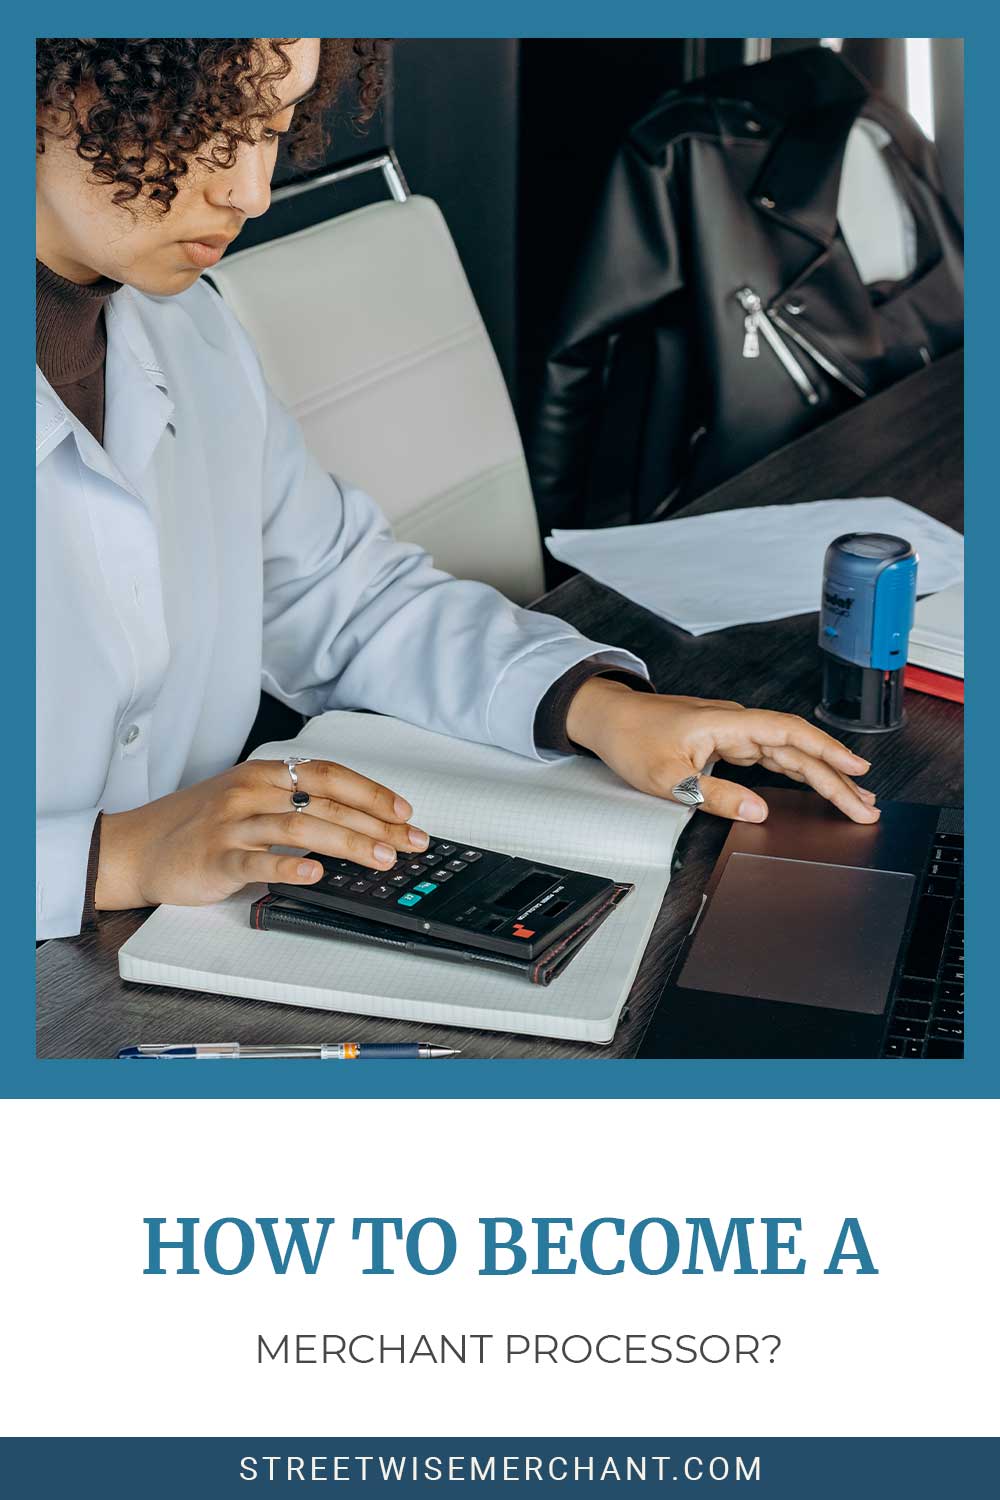 Person using a calculator in front of a laptop on a desk - How To Become A Merchant Processor?